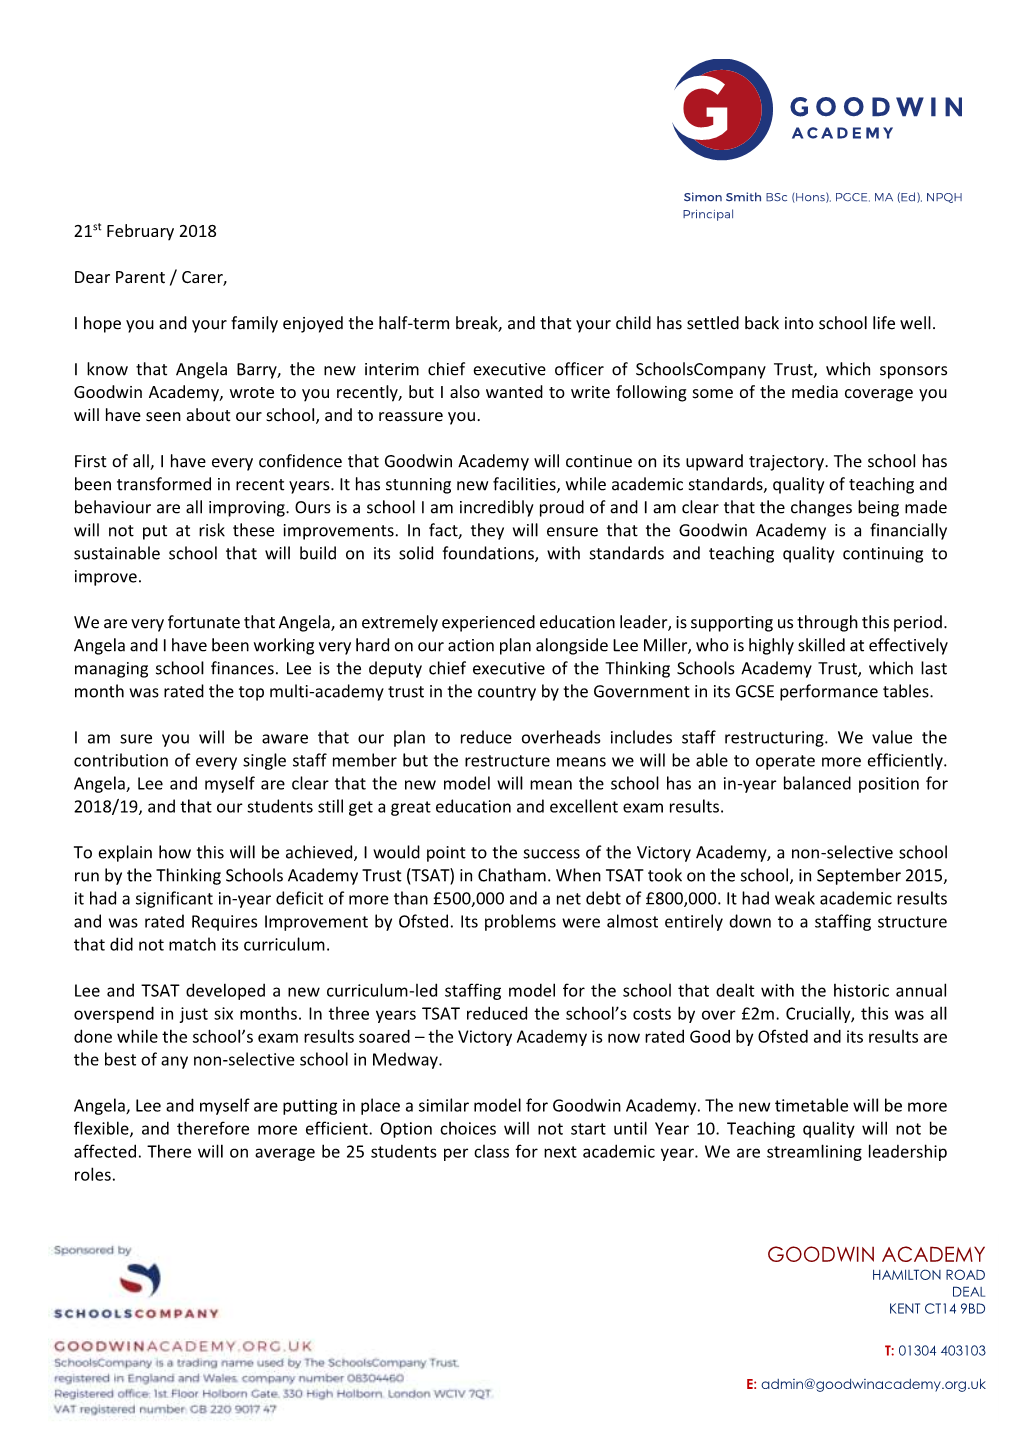 Goodwin Academy, Wrote to You Recently, but I Also Wanted to Write Following Some of the Media Coverage You Will Have Seen About Our School, and to Reassure You